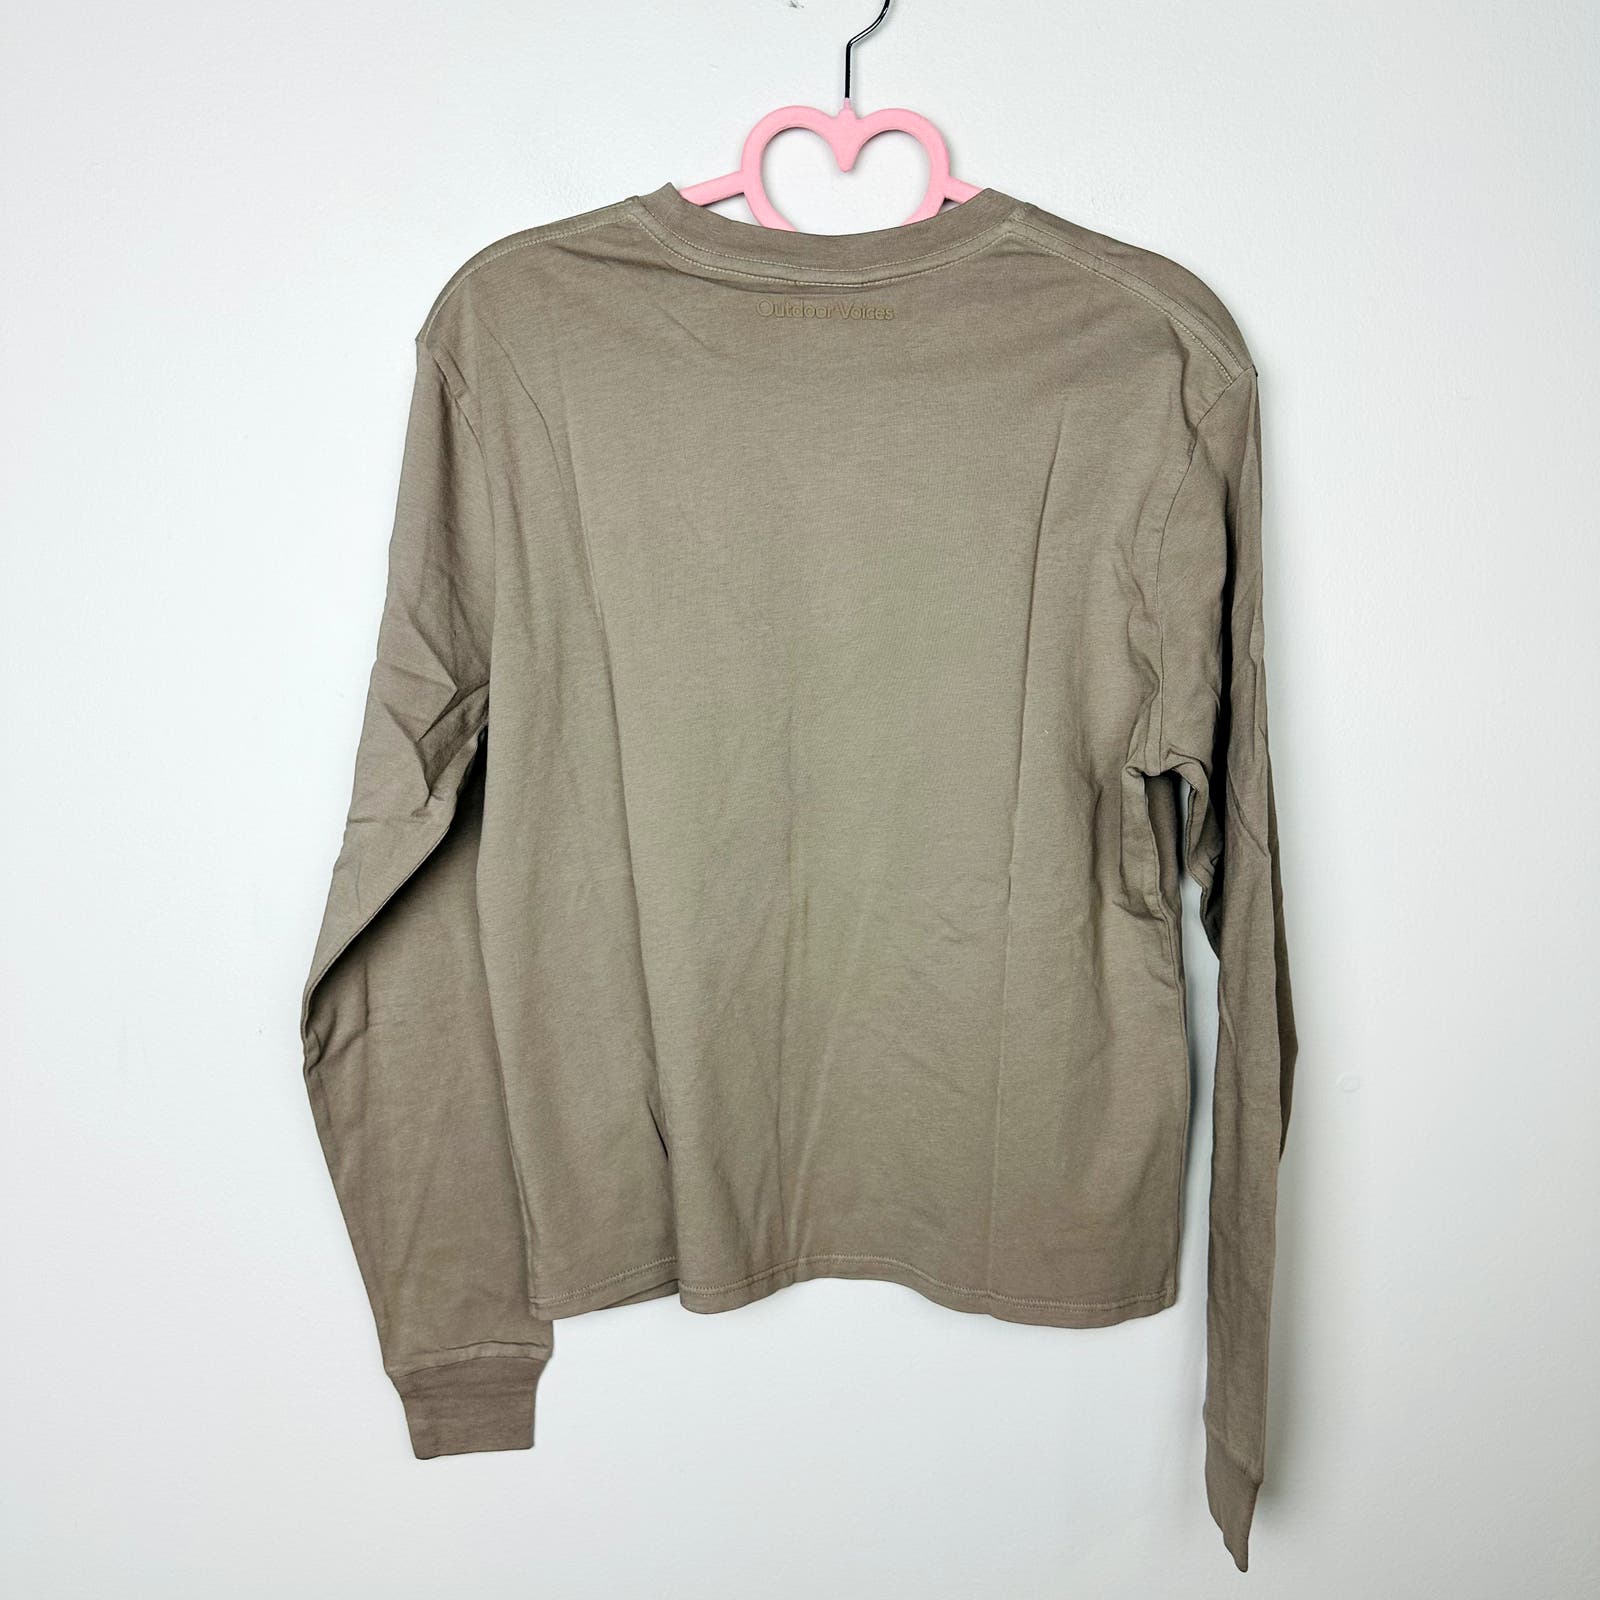 Outdoor Voices NWT Everyday Longsleeve Top Truffle Size XXS